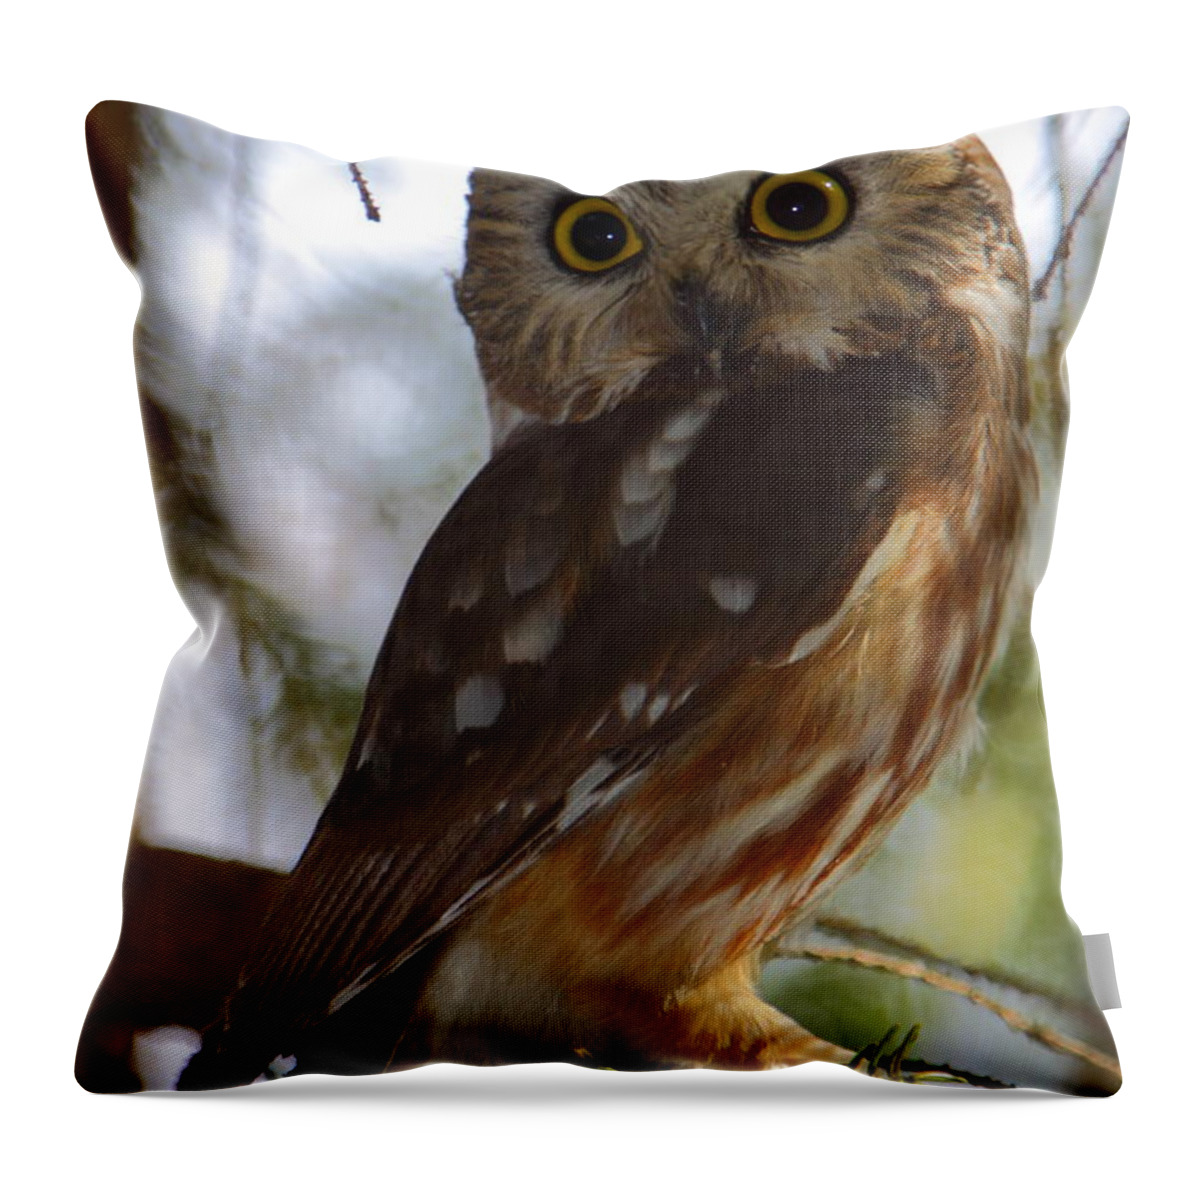 Owl Throw Pillow featuring the photograph Northern Saw-whet Owl II by Bruce J Robinson